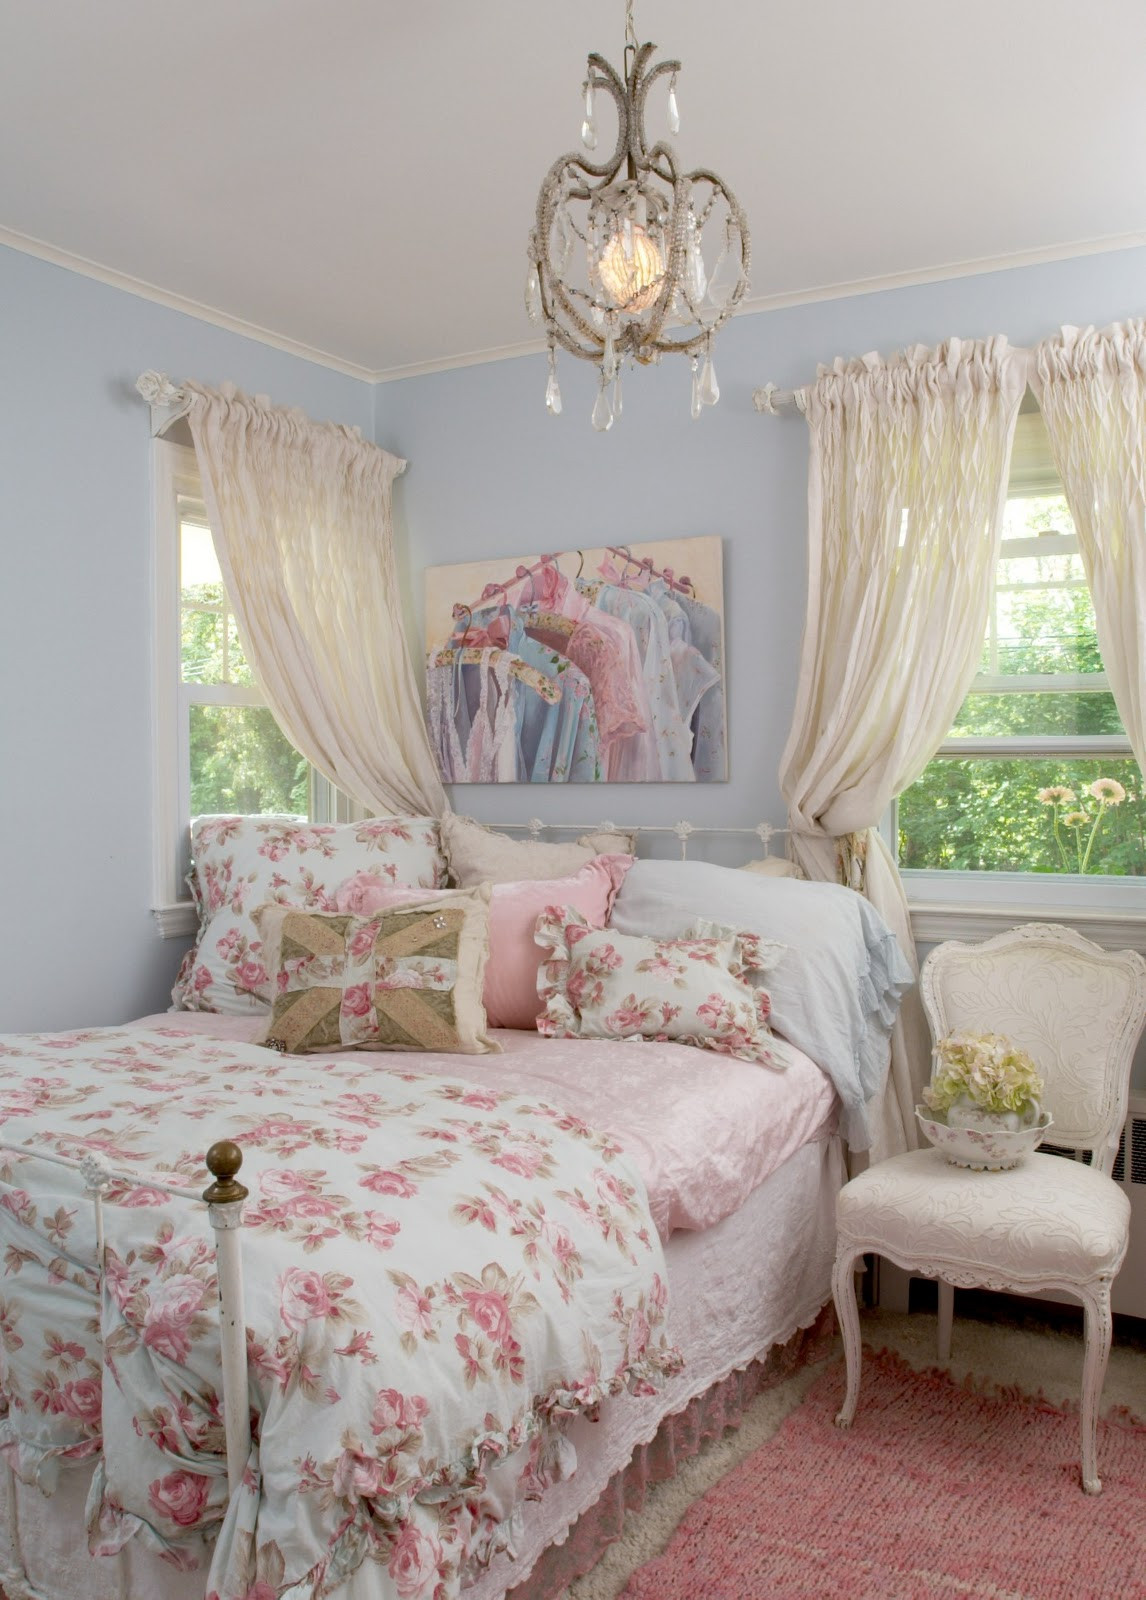 Shabby Chic Bedroom Accessories
 Maison Decor My Shabby Bedroom Makeover Plan